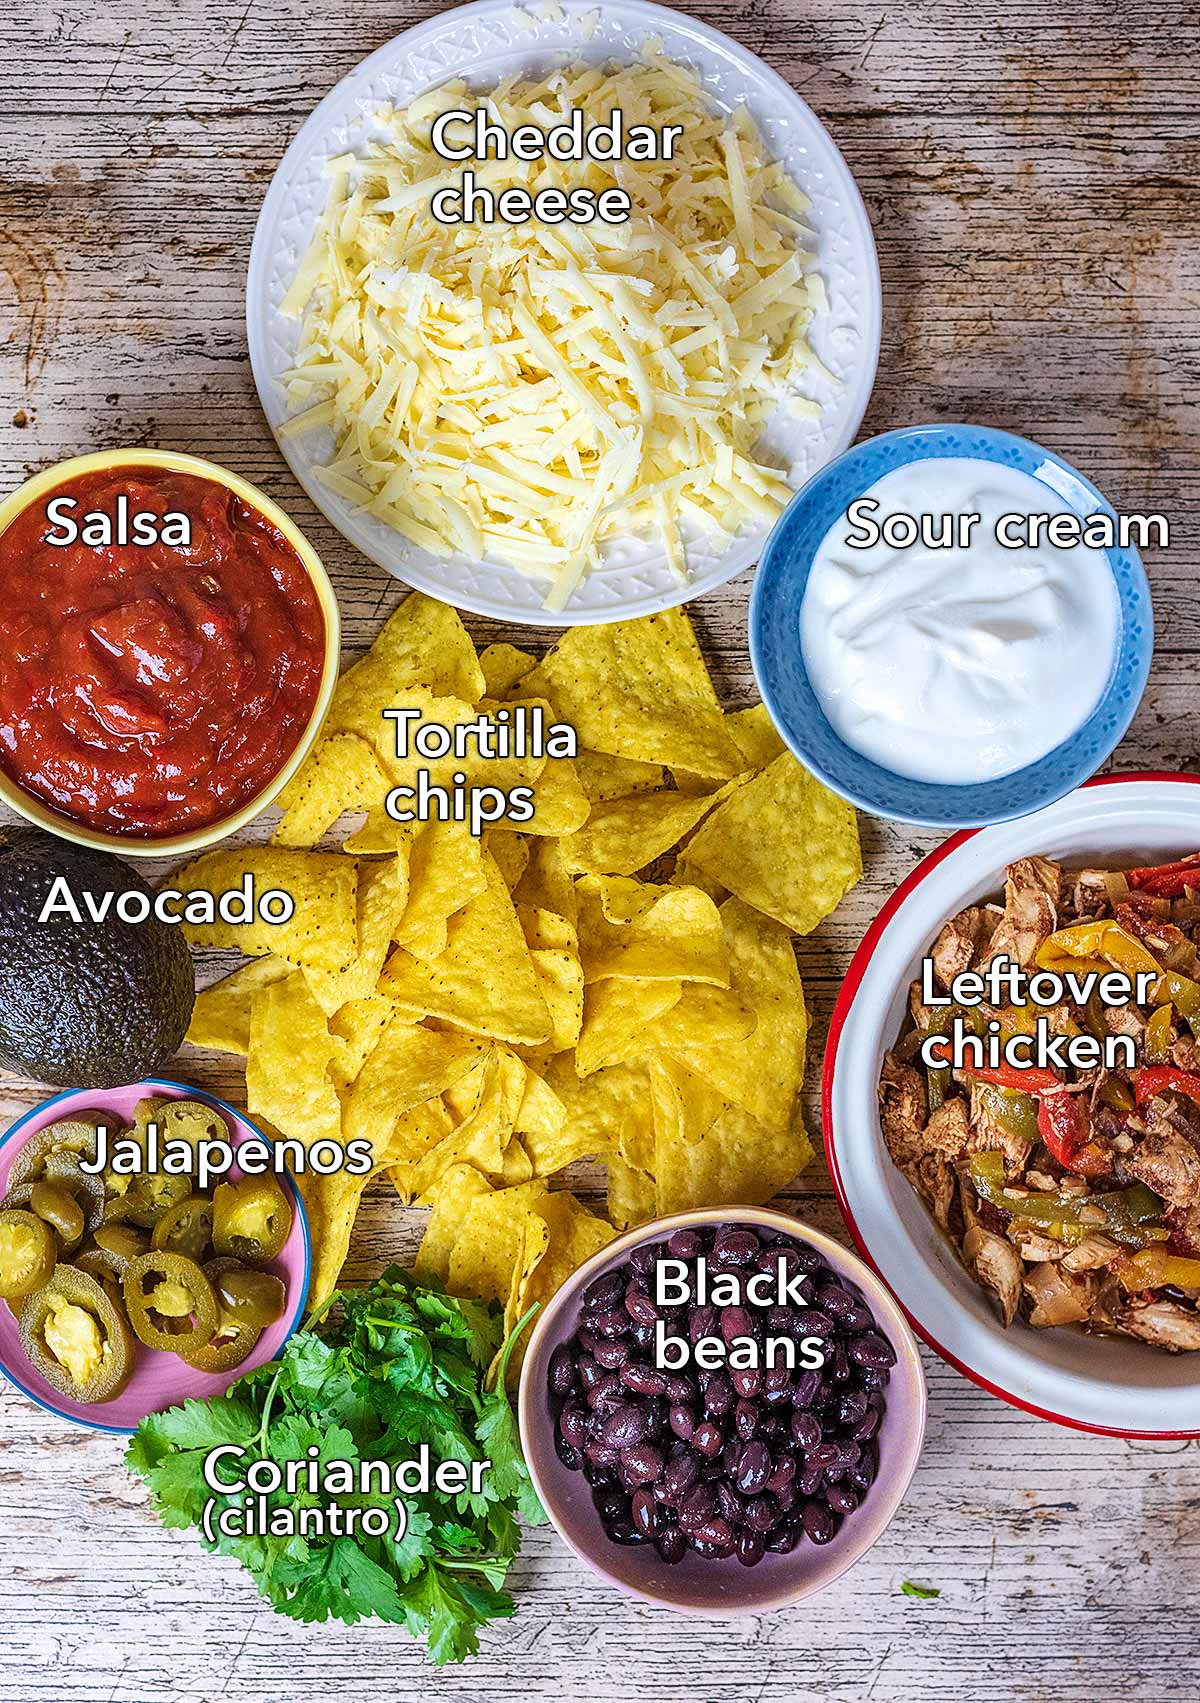 All the ingredients needed to make this recipe all laid out on a wooden surface.